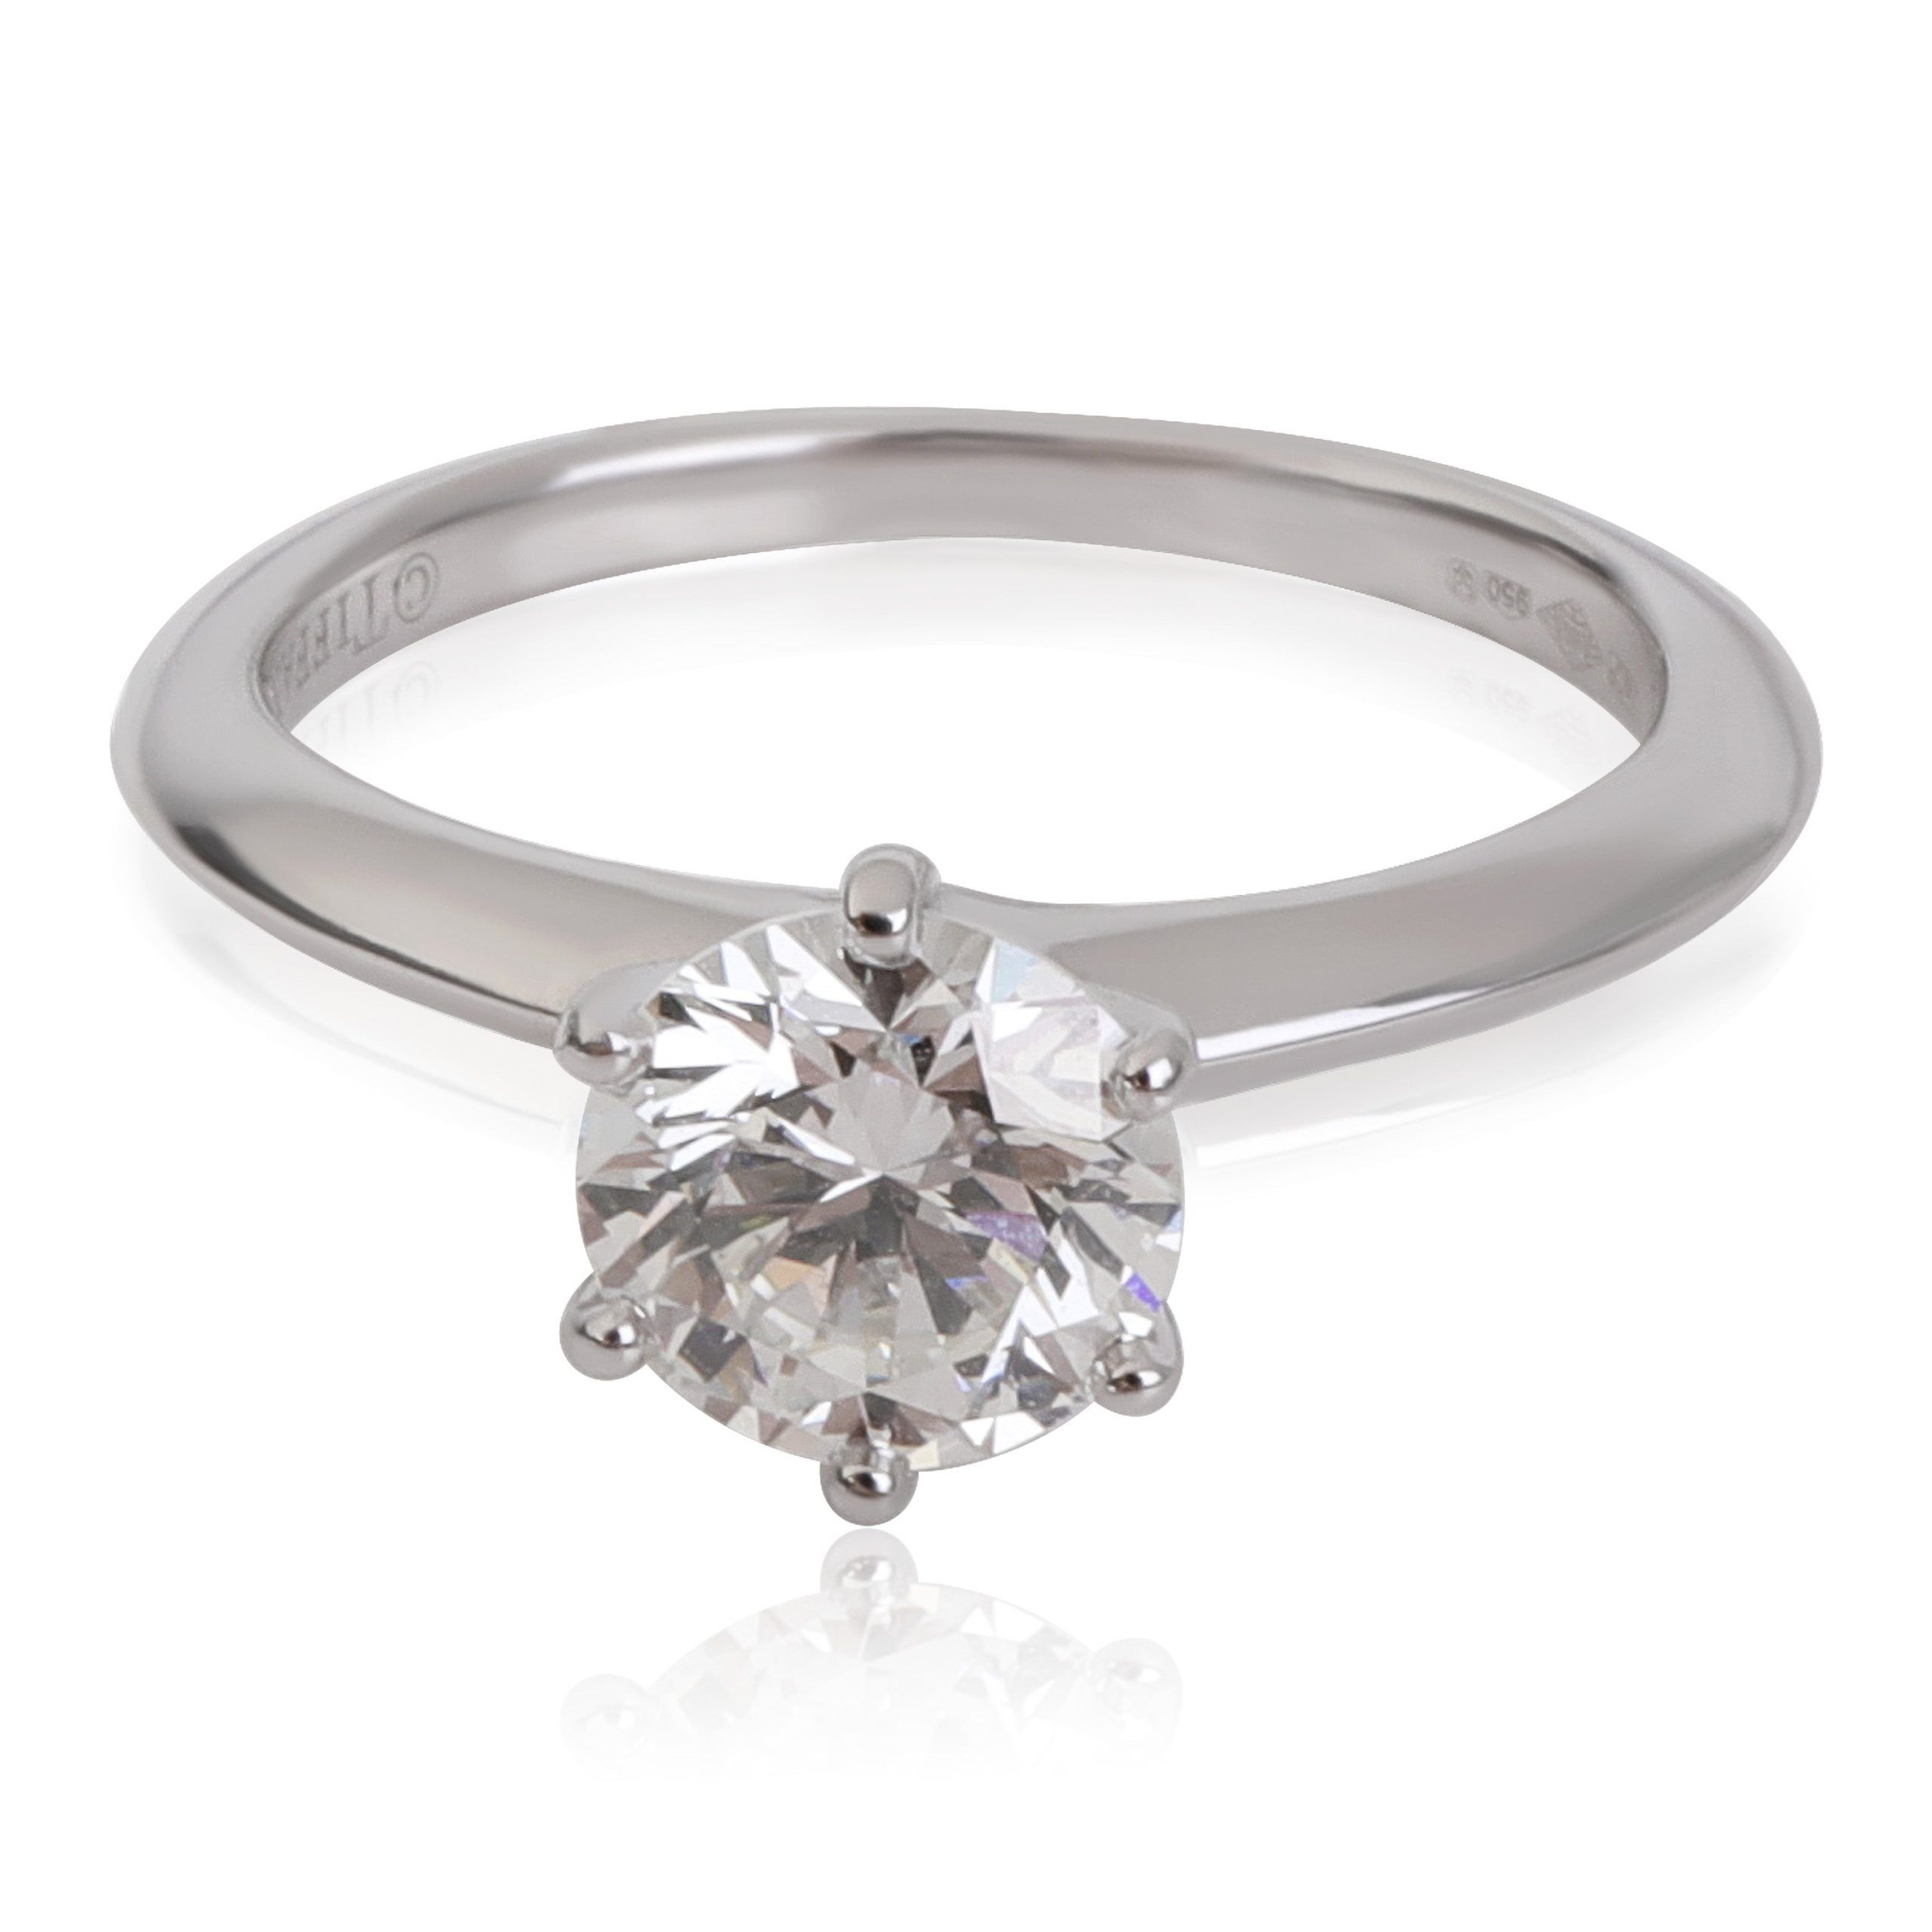 Tiffany & Co. Tiffany & Co. Diamond Engagement Ring in Platinum (0.94 ct I/VVS1) Size ONE SIZE - 1 Preview